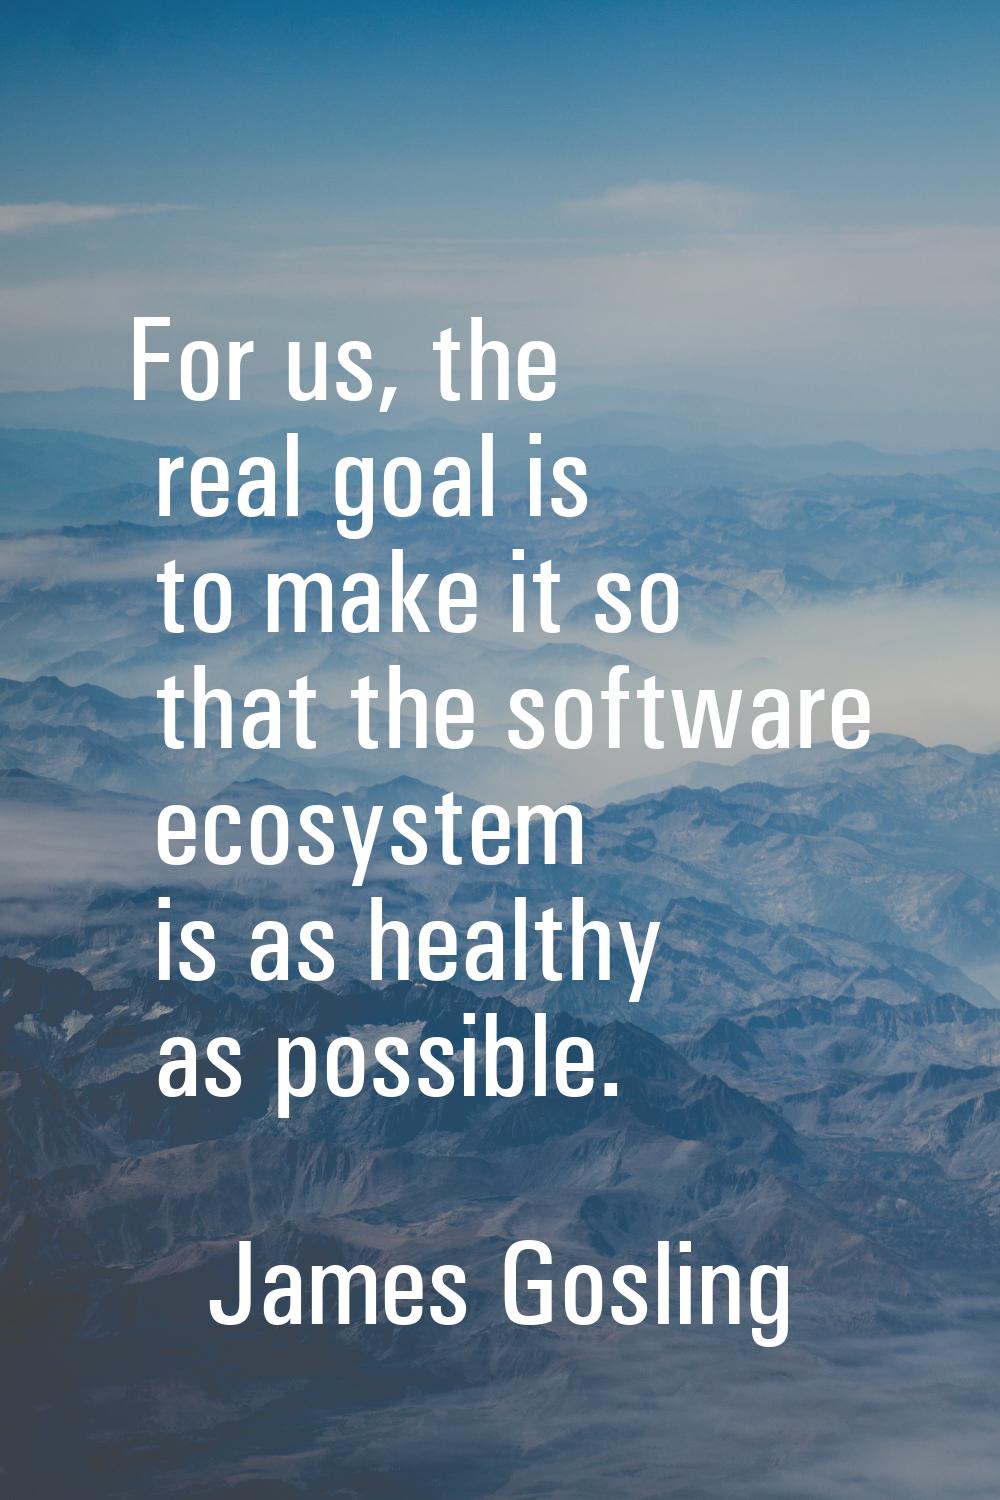 For us, the real goal is to make it so that the software ecosystem is as healthy as possible.